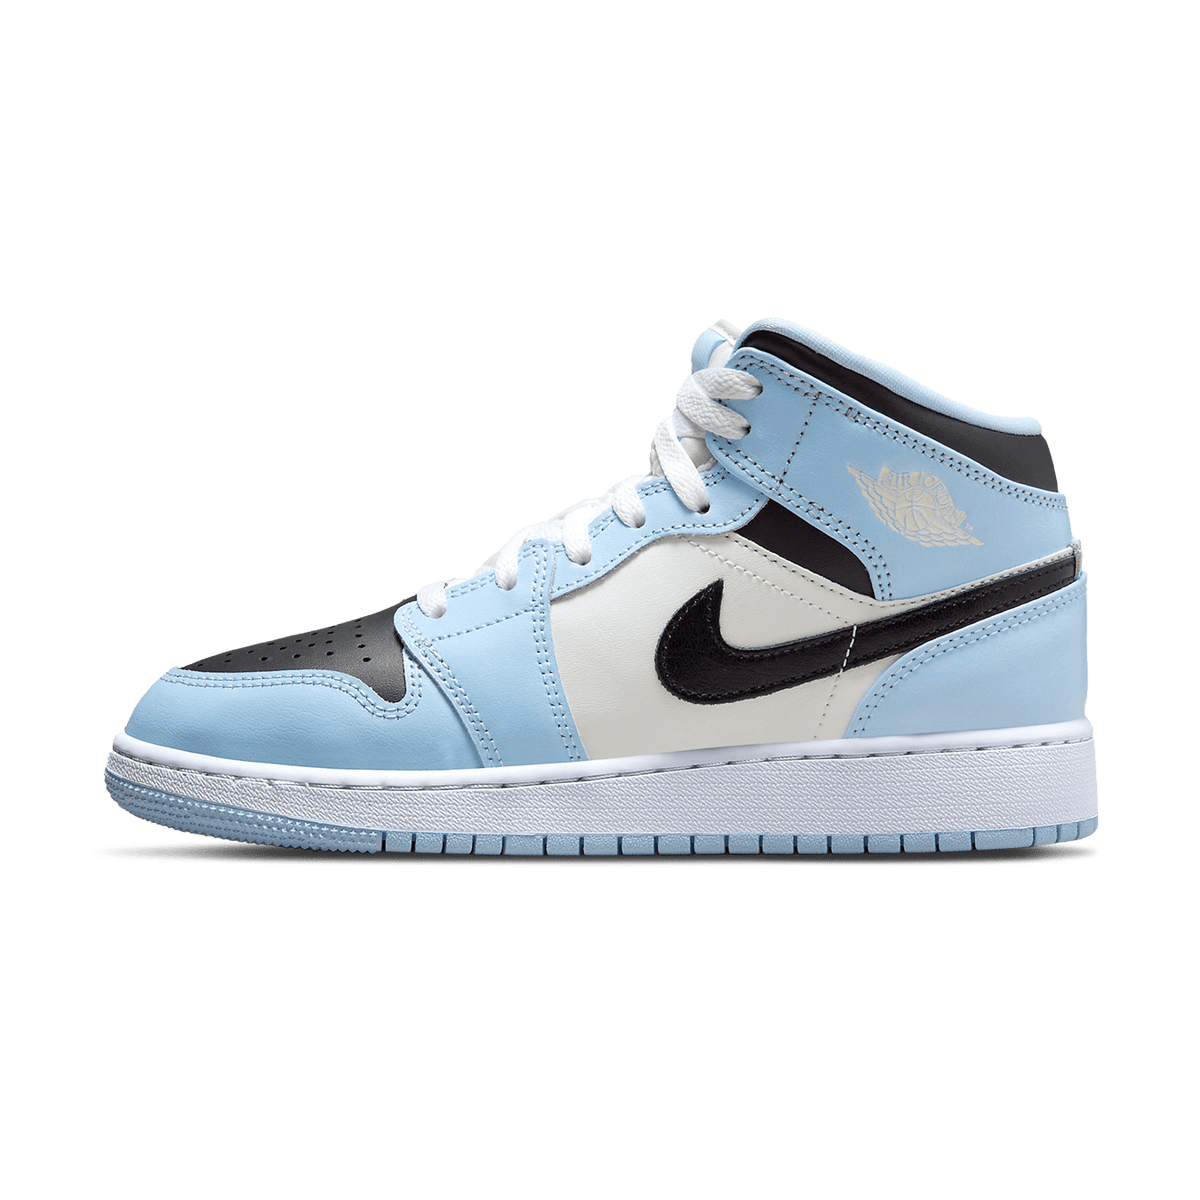 Travis Scott x Air Force mask 1 Low Toddler Size 'Cactus Jack' - CT0911 900  – RvceShops - nike dunks for sale online